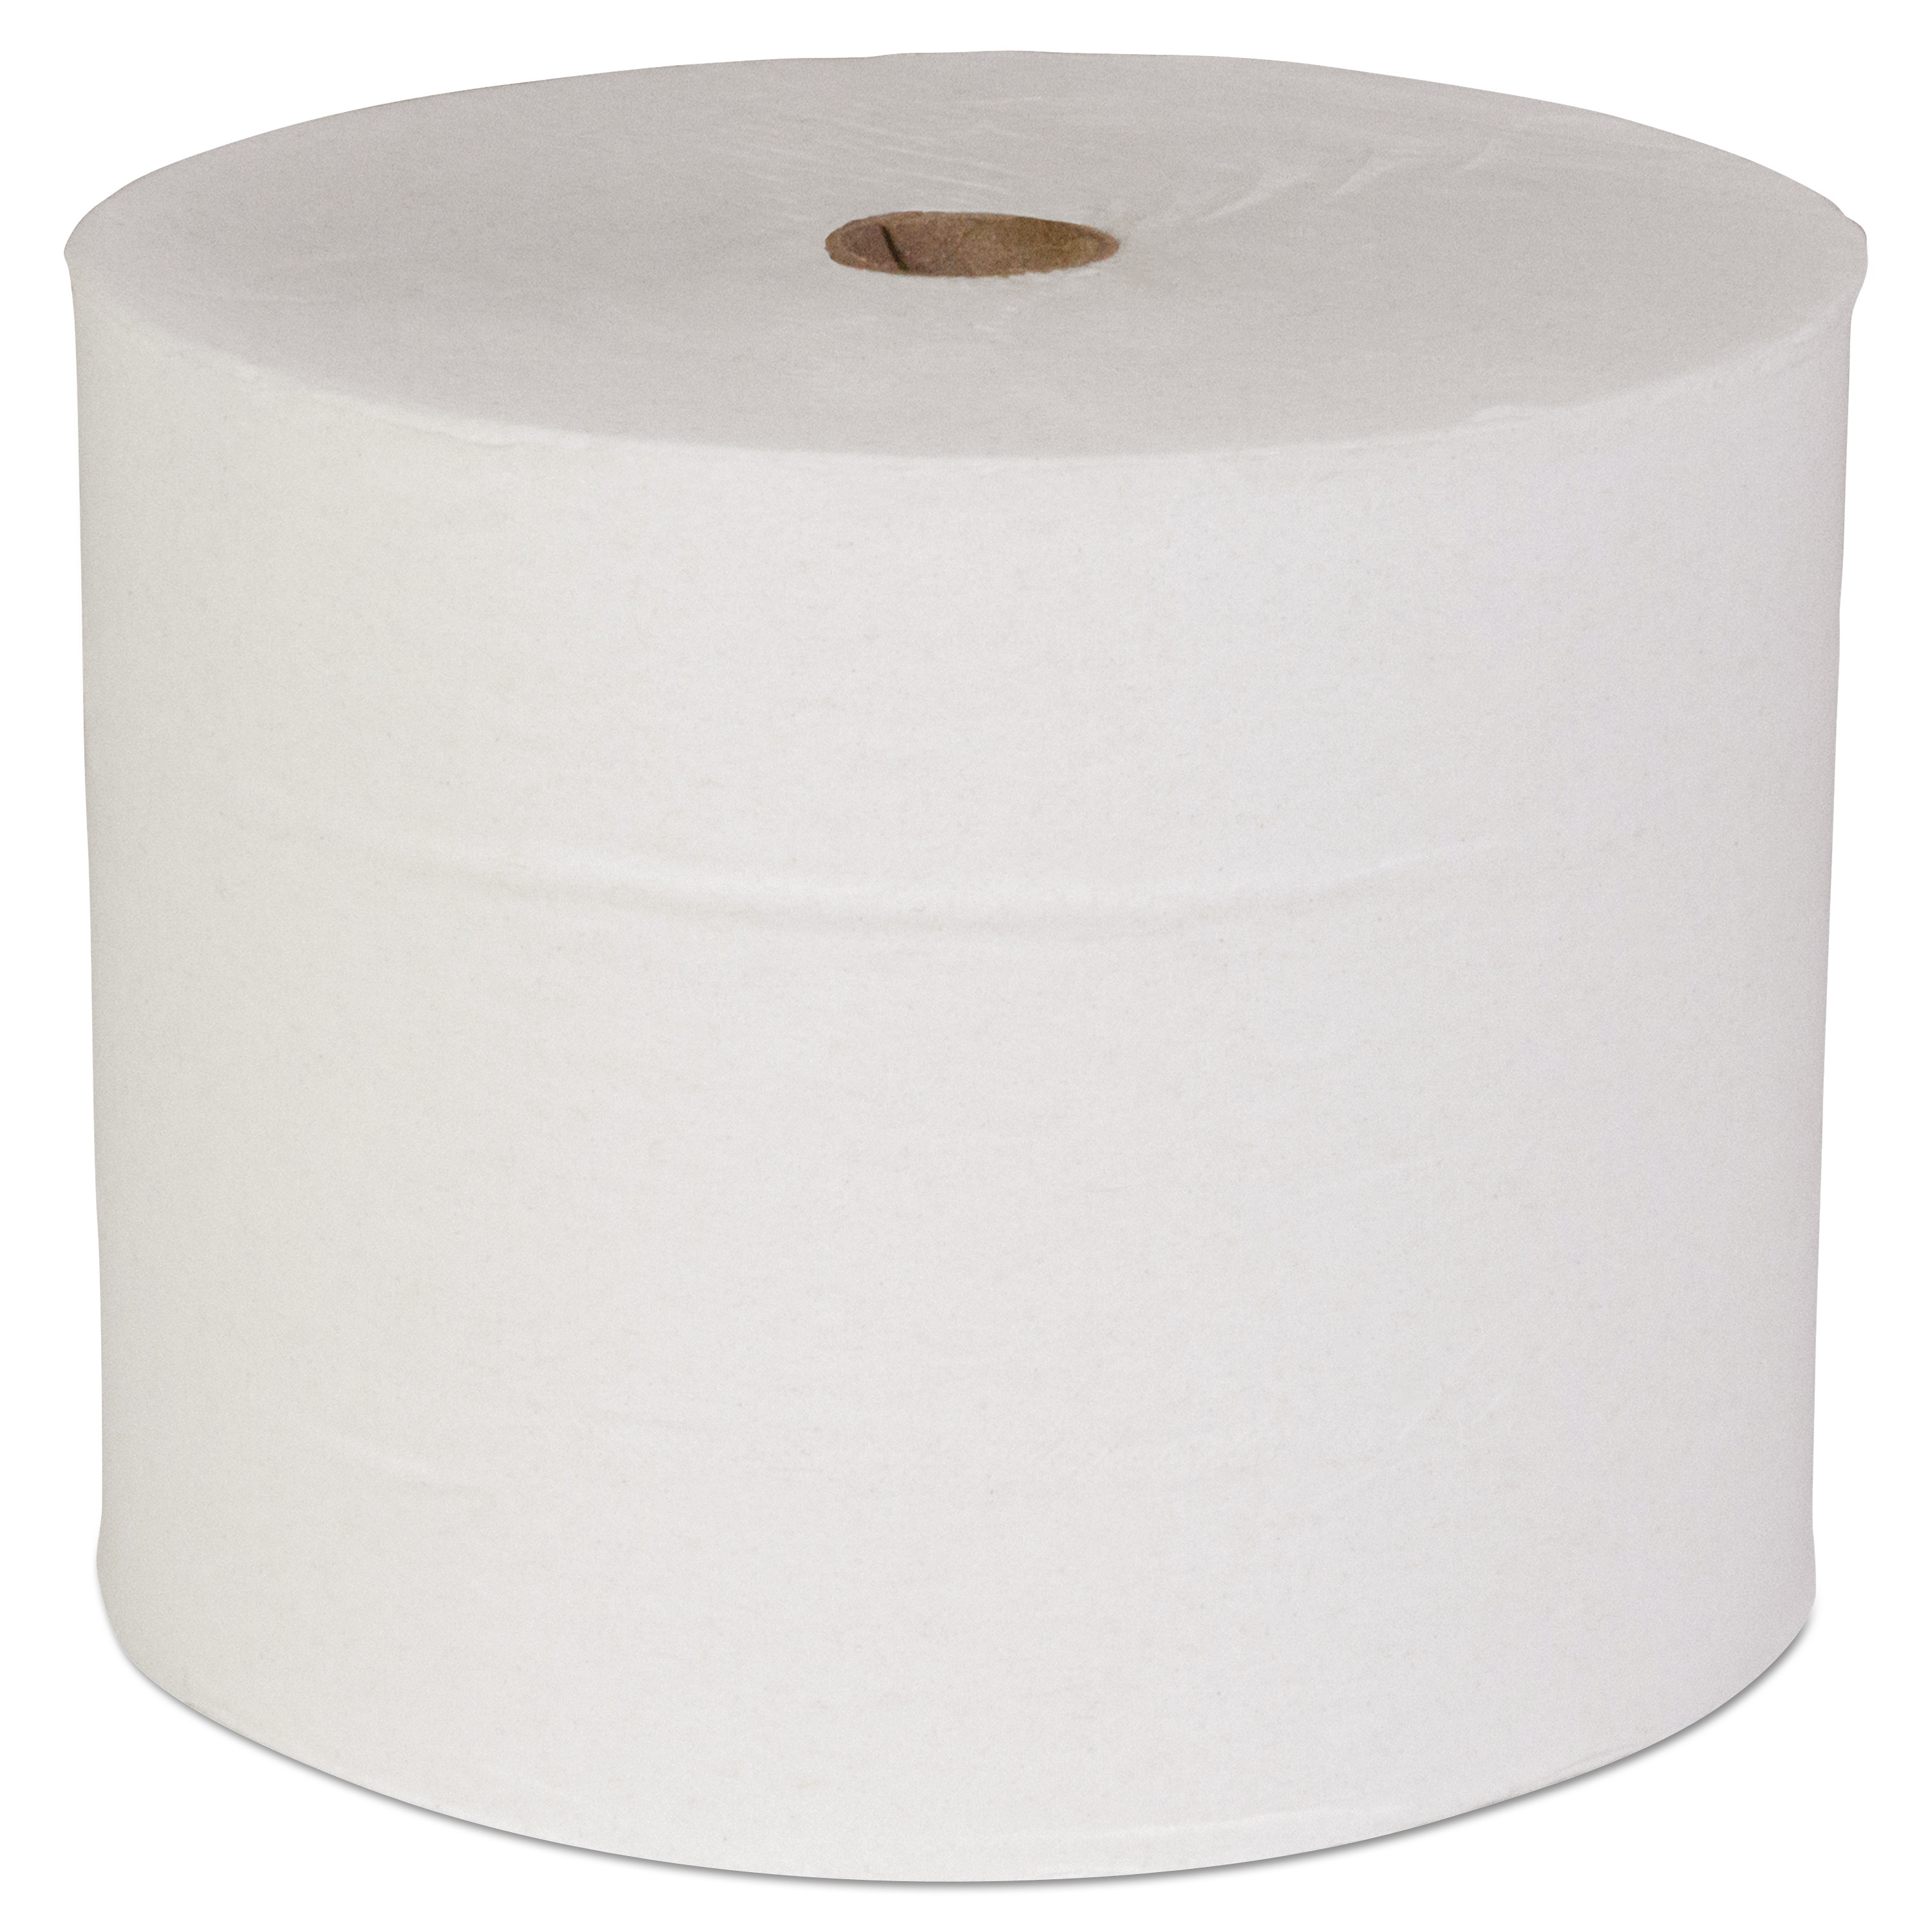 Pro Small Core High Capacity/SRB Bath Tissue, Septic Safe, 2-Ply, White, 1100 Sheets/Roll, 36 Rolls/Carton